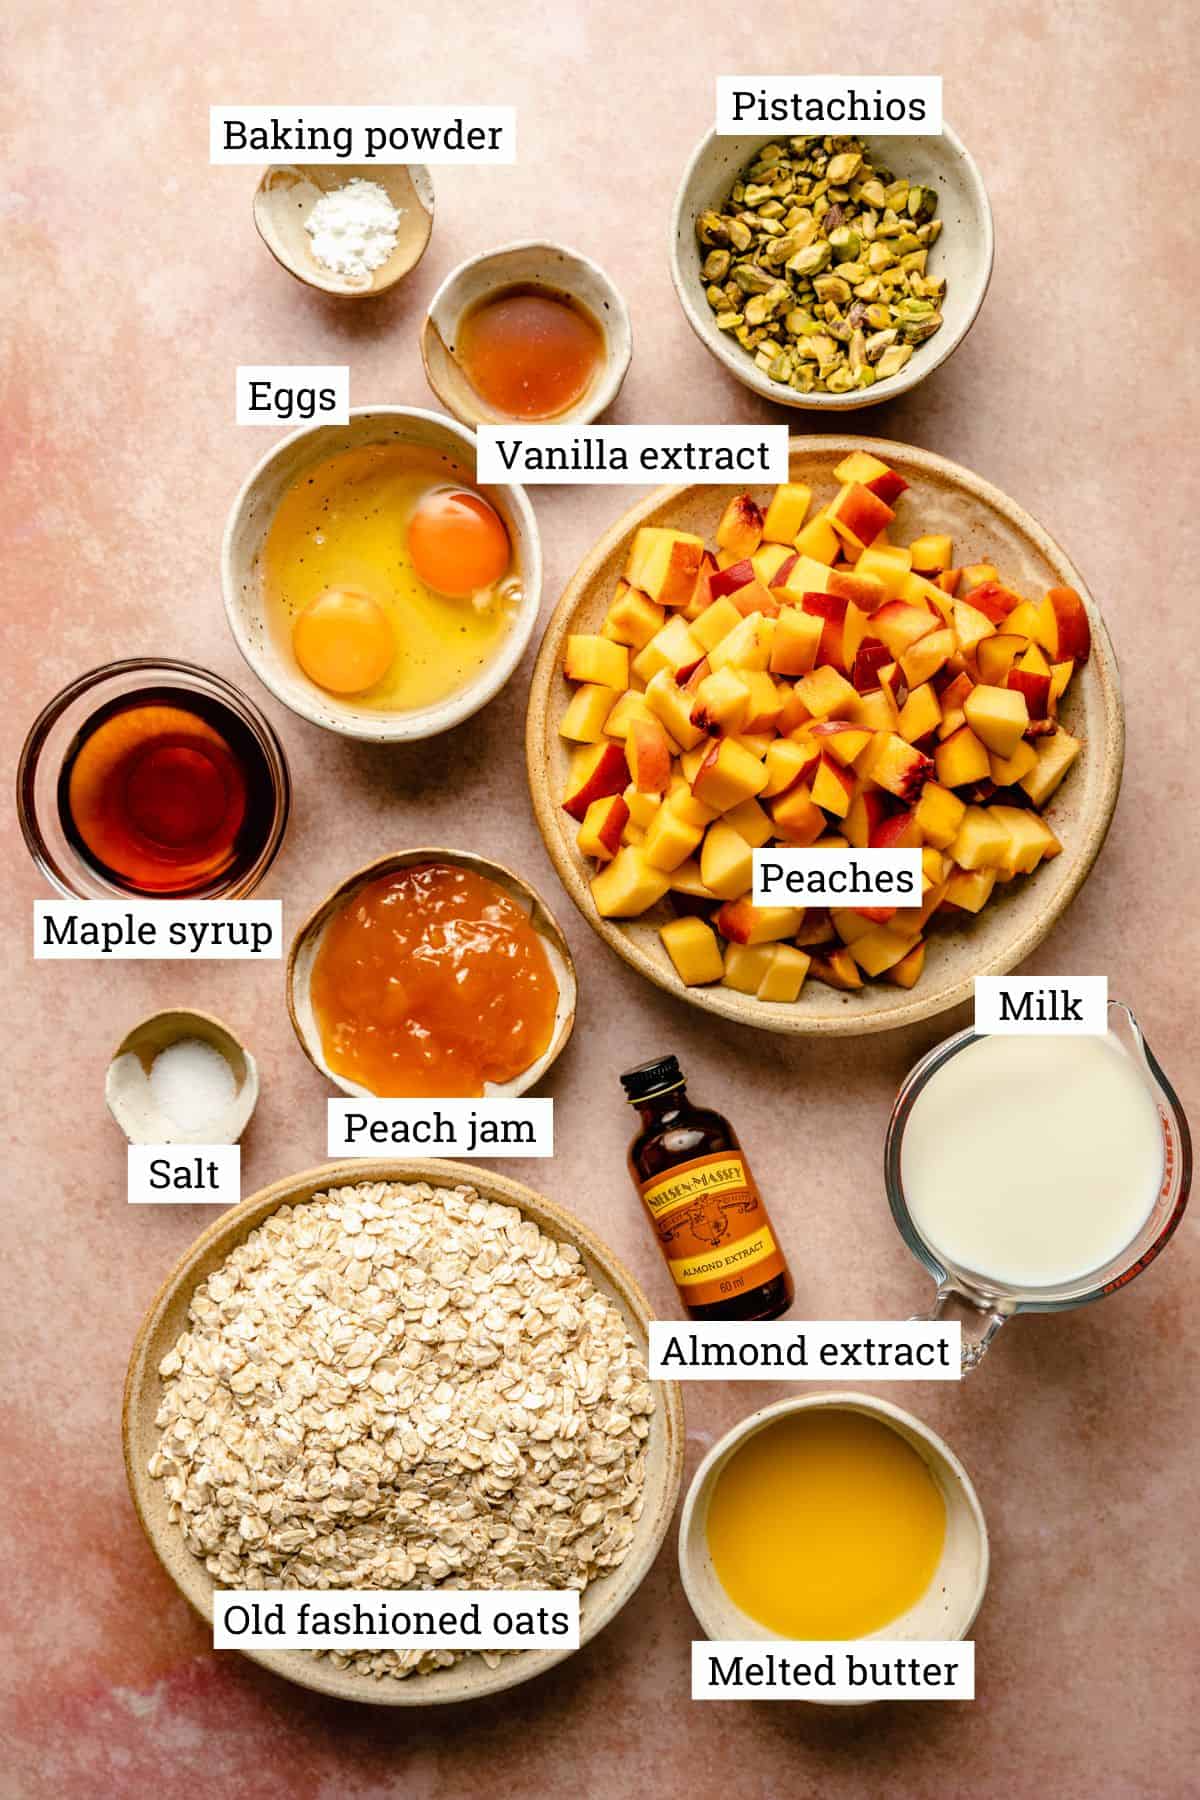 Ingredients for the baked oatmeal in various bowls.